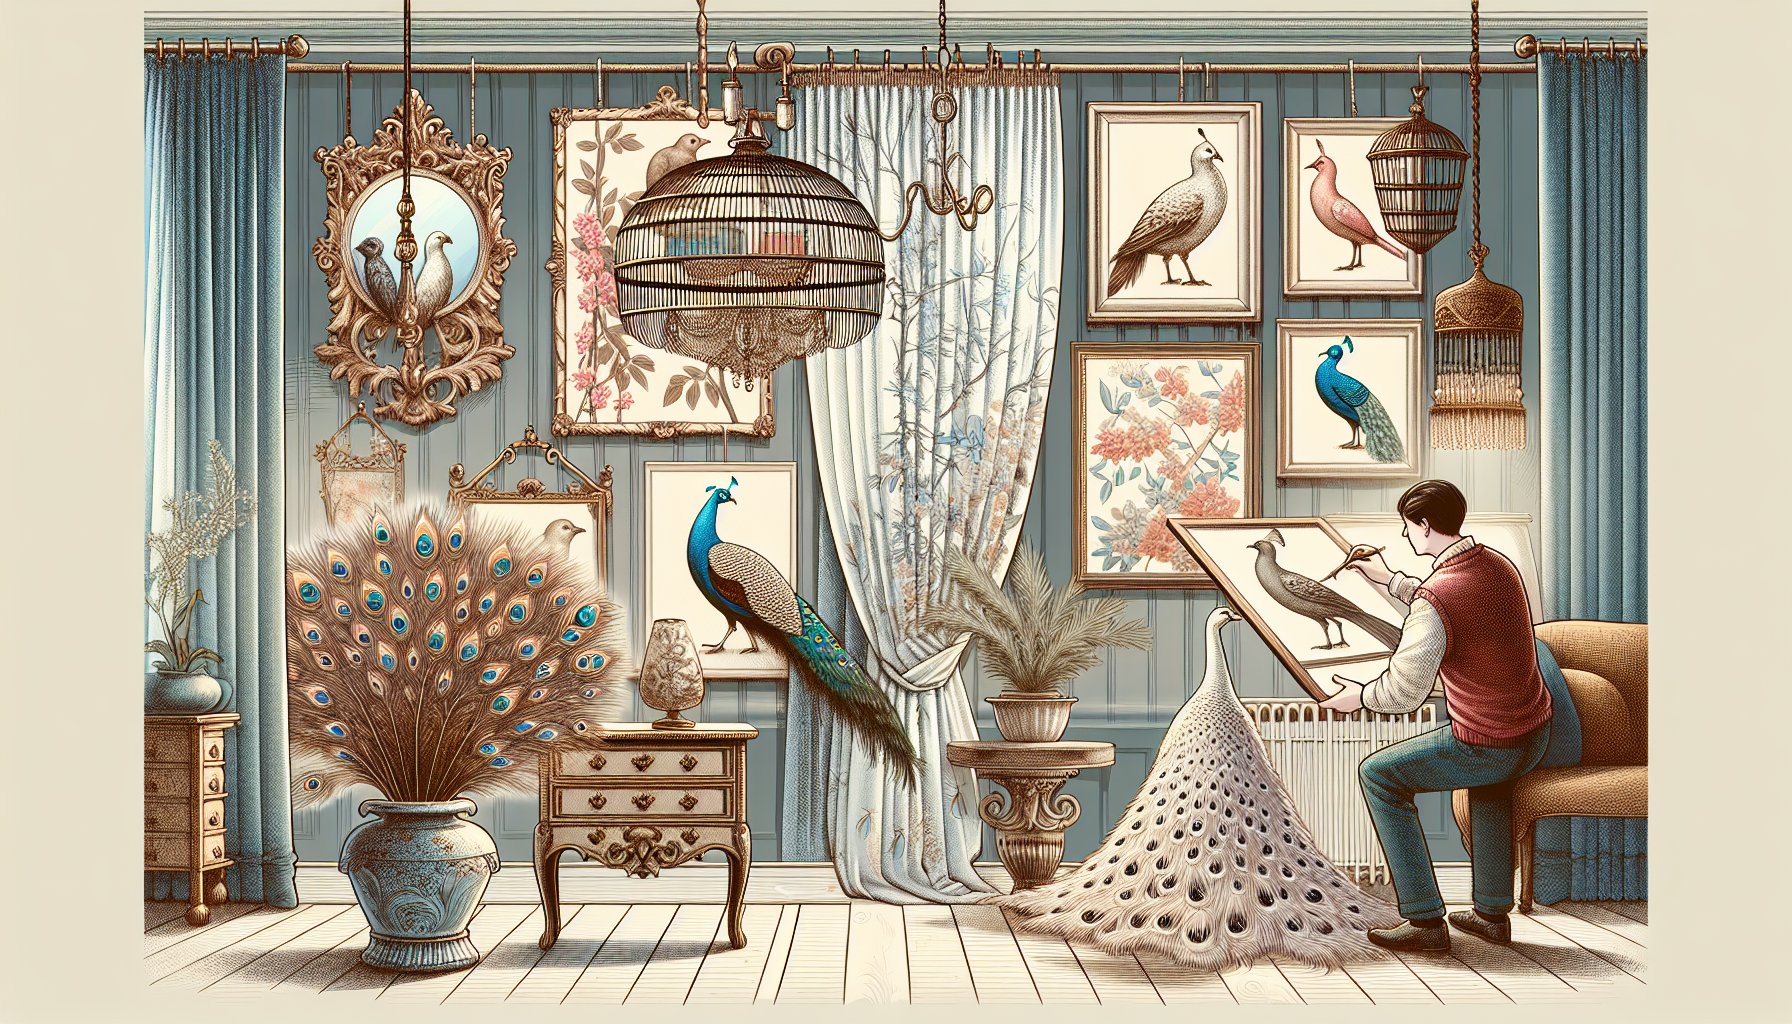 Choosing bird decor for different rooms including central items and anchor pieces